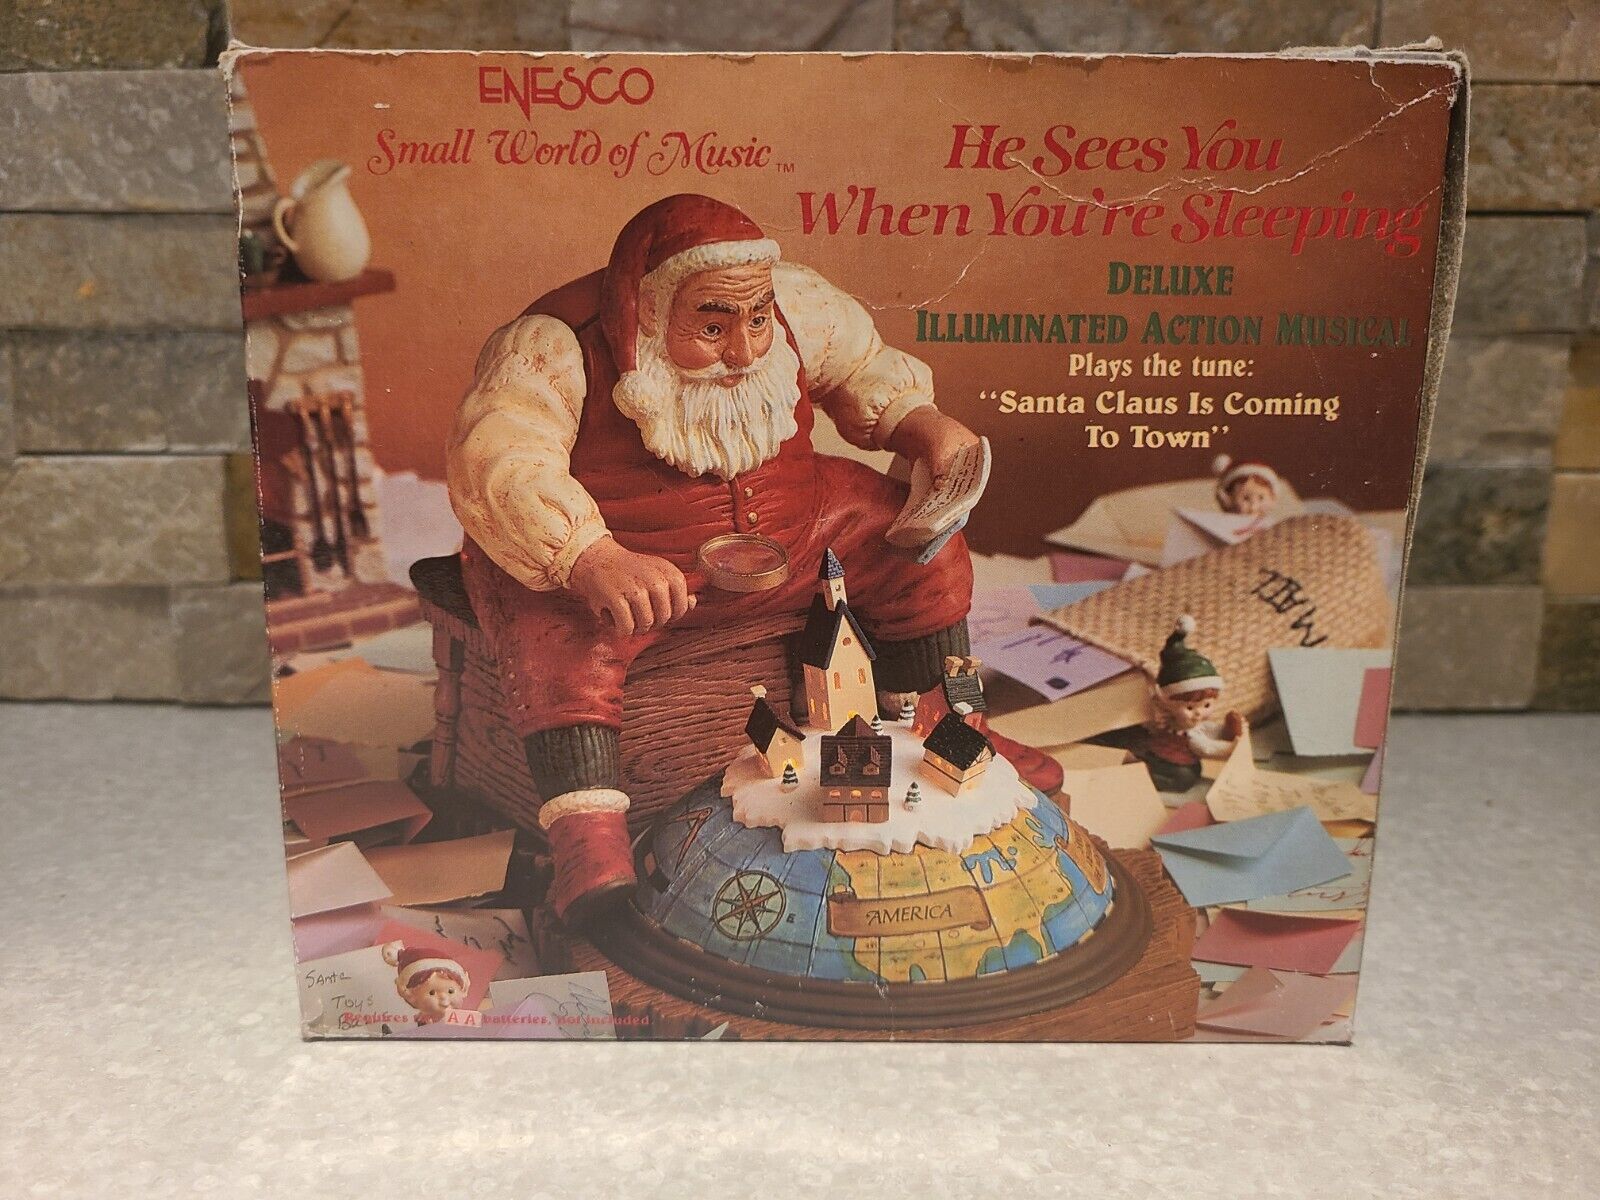 ENESCO SMALL WORLD OF MUSIC HE SEES YOU WHEN YOUR SLEEPING 1990 ILLUMINATED